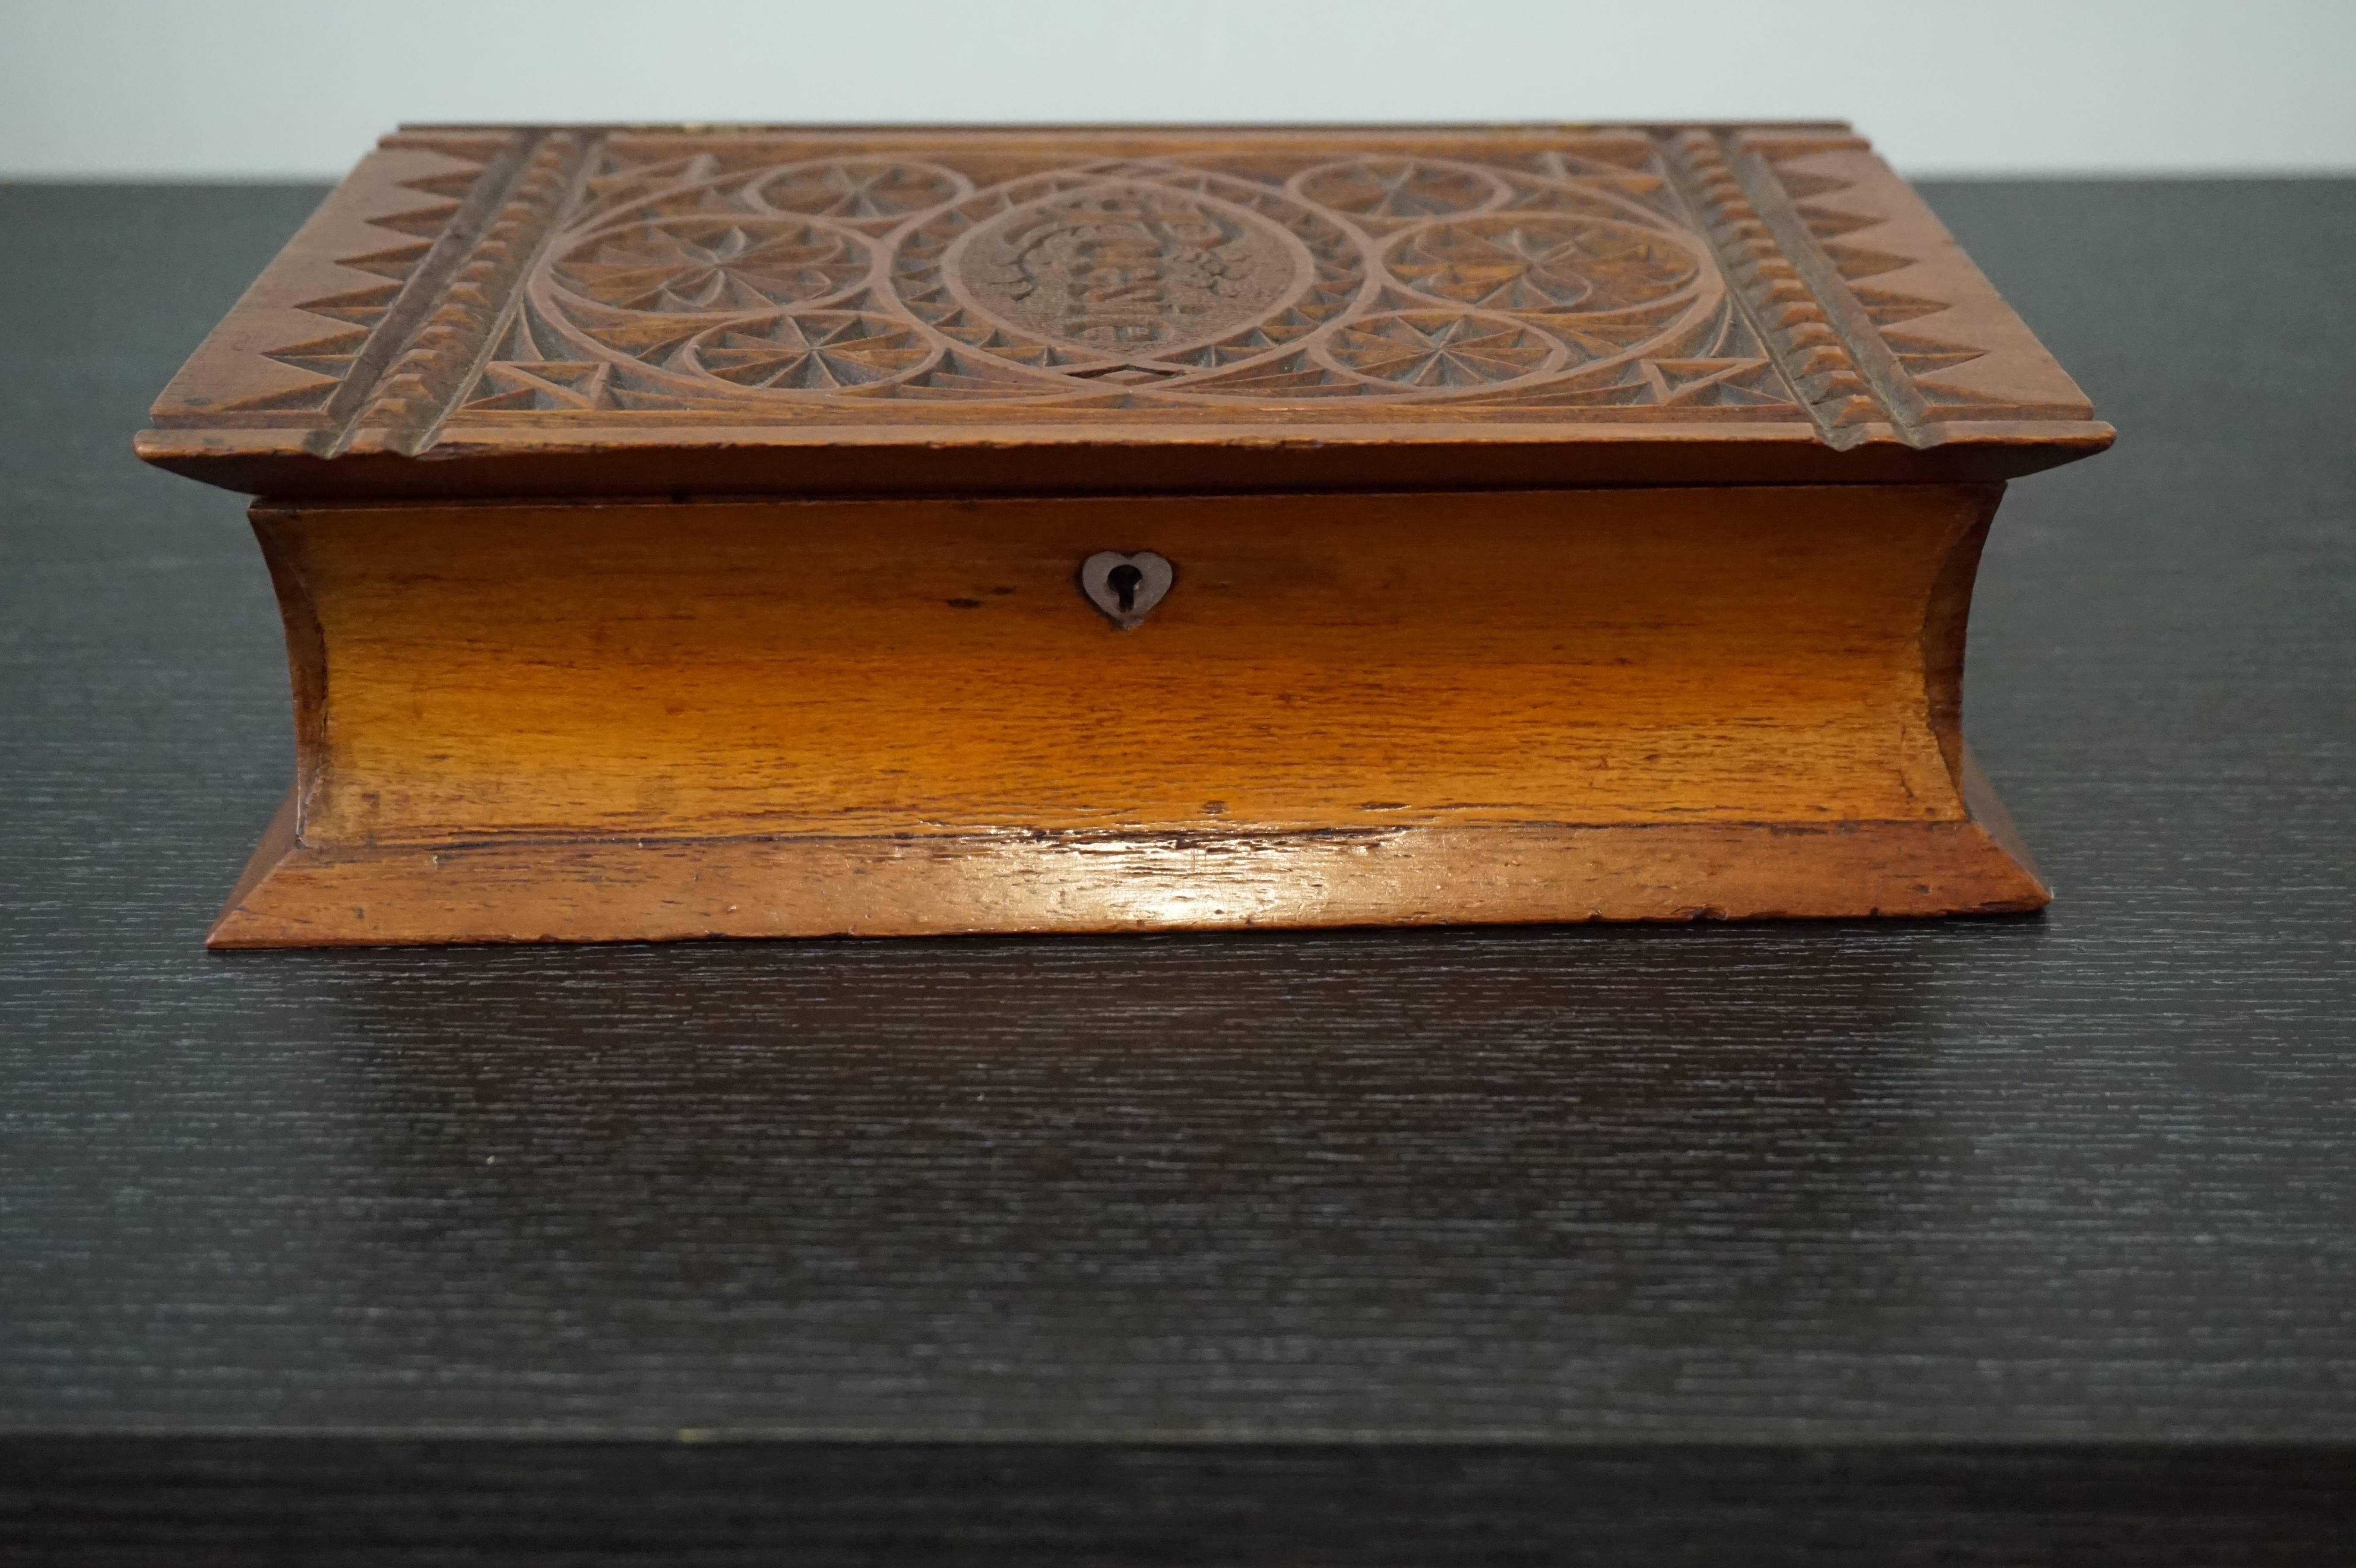 Rare and important piece of German social history.

This book-shaped and hand-carved jewelry box from 1840-1860 is likely to be the only one of its kind. A 'poesie album' was a booklet mainly for children. It was also known as a 'Freundschaftsbuch